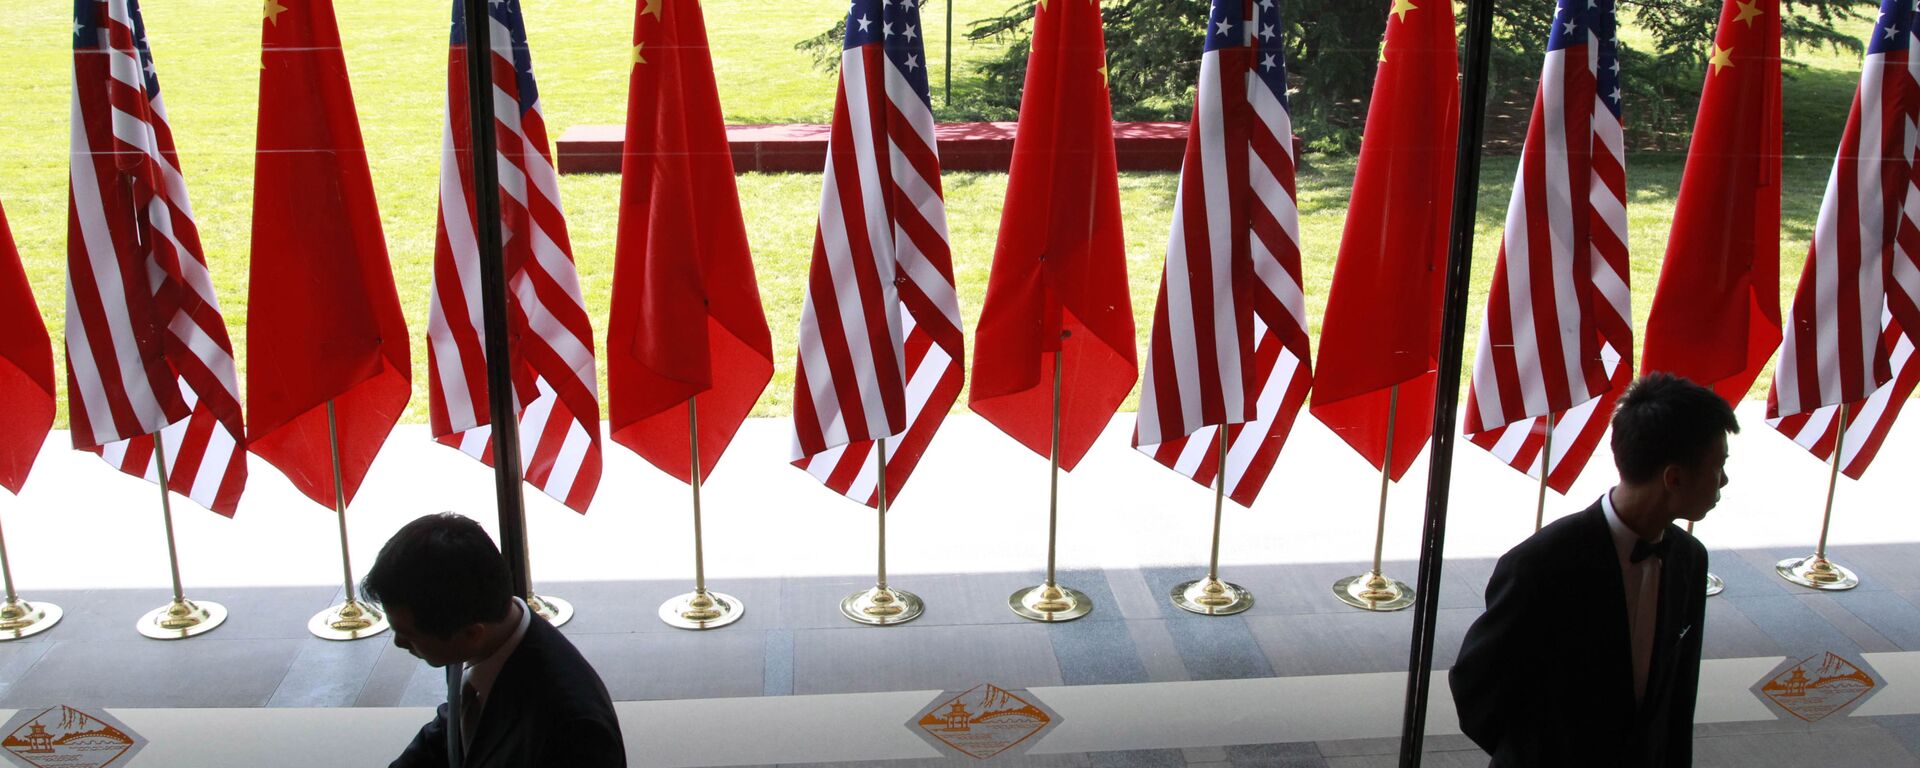 Chinese and US national flags are posted for the opening ceremony of the U.S.- China Strategic and Economic Dialogue at The Diaoyutai state guesthouse in Beijing Thursday, May 3, 2012 - Sputnik International, 1920, 26.12.2020